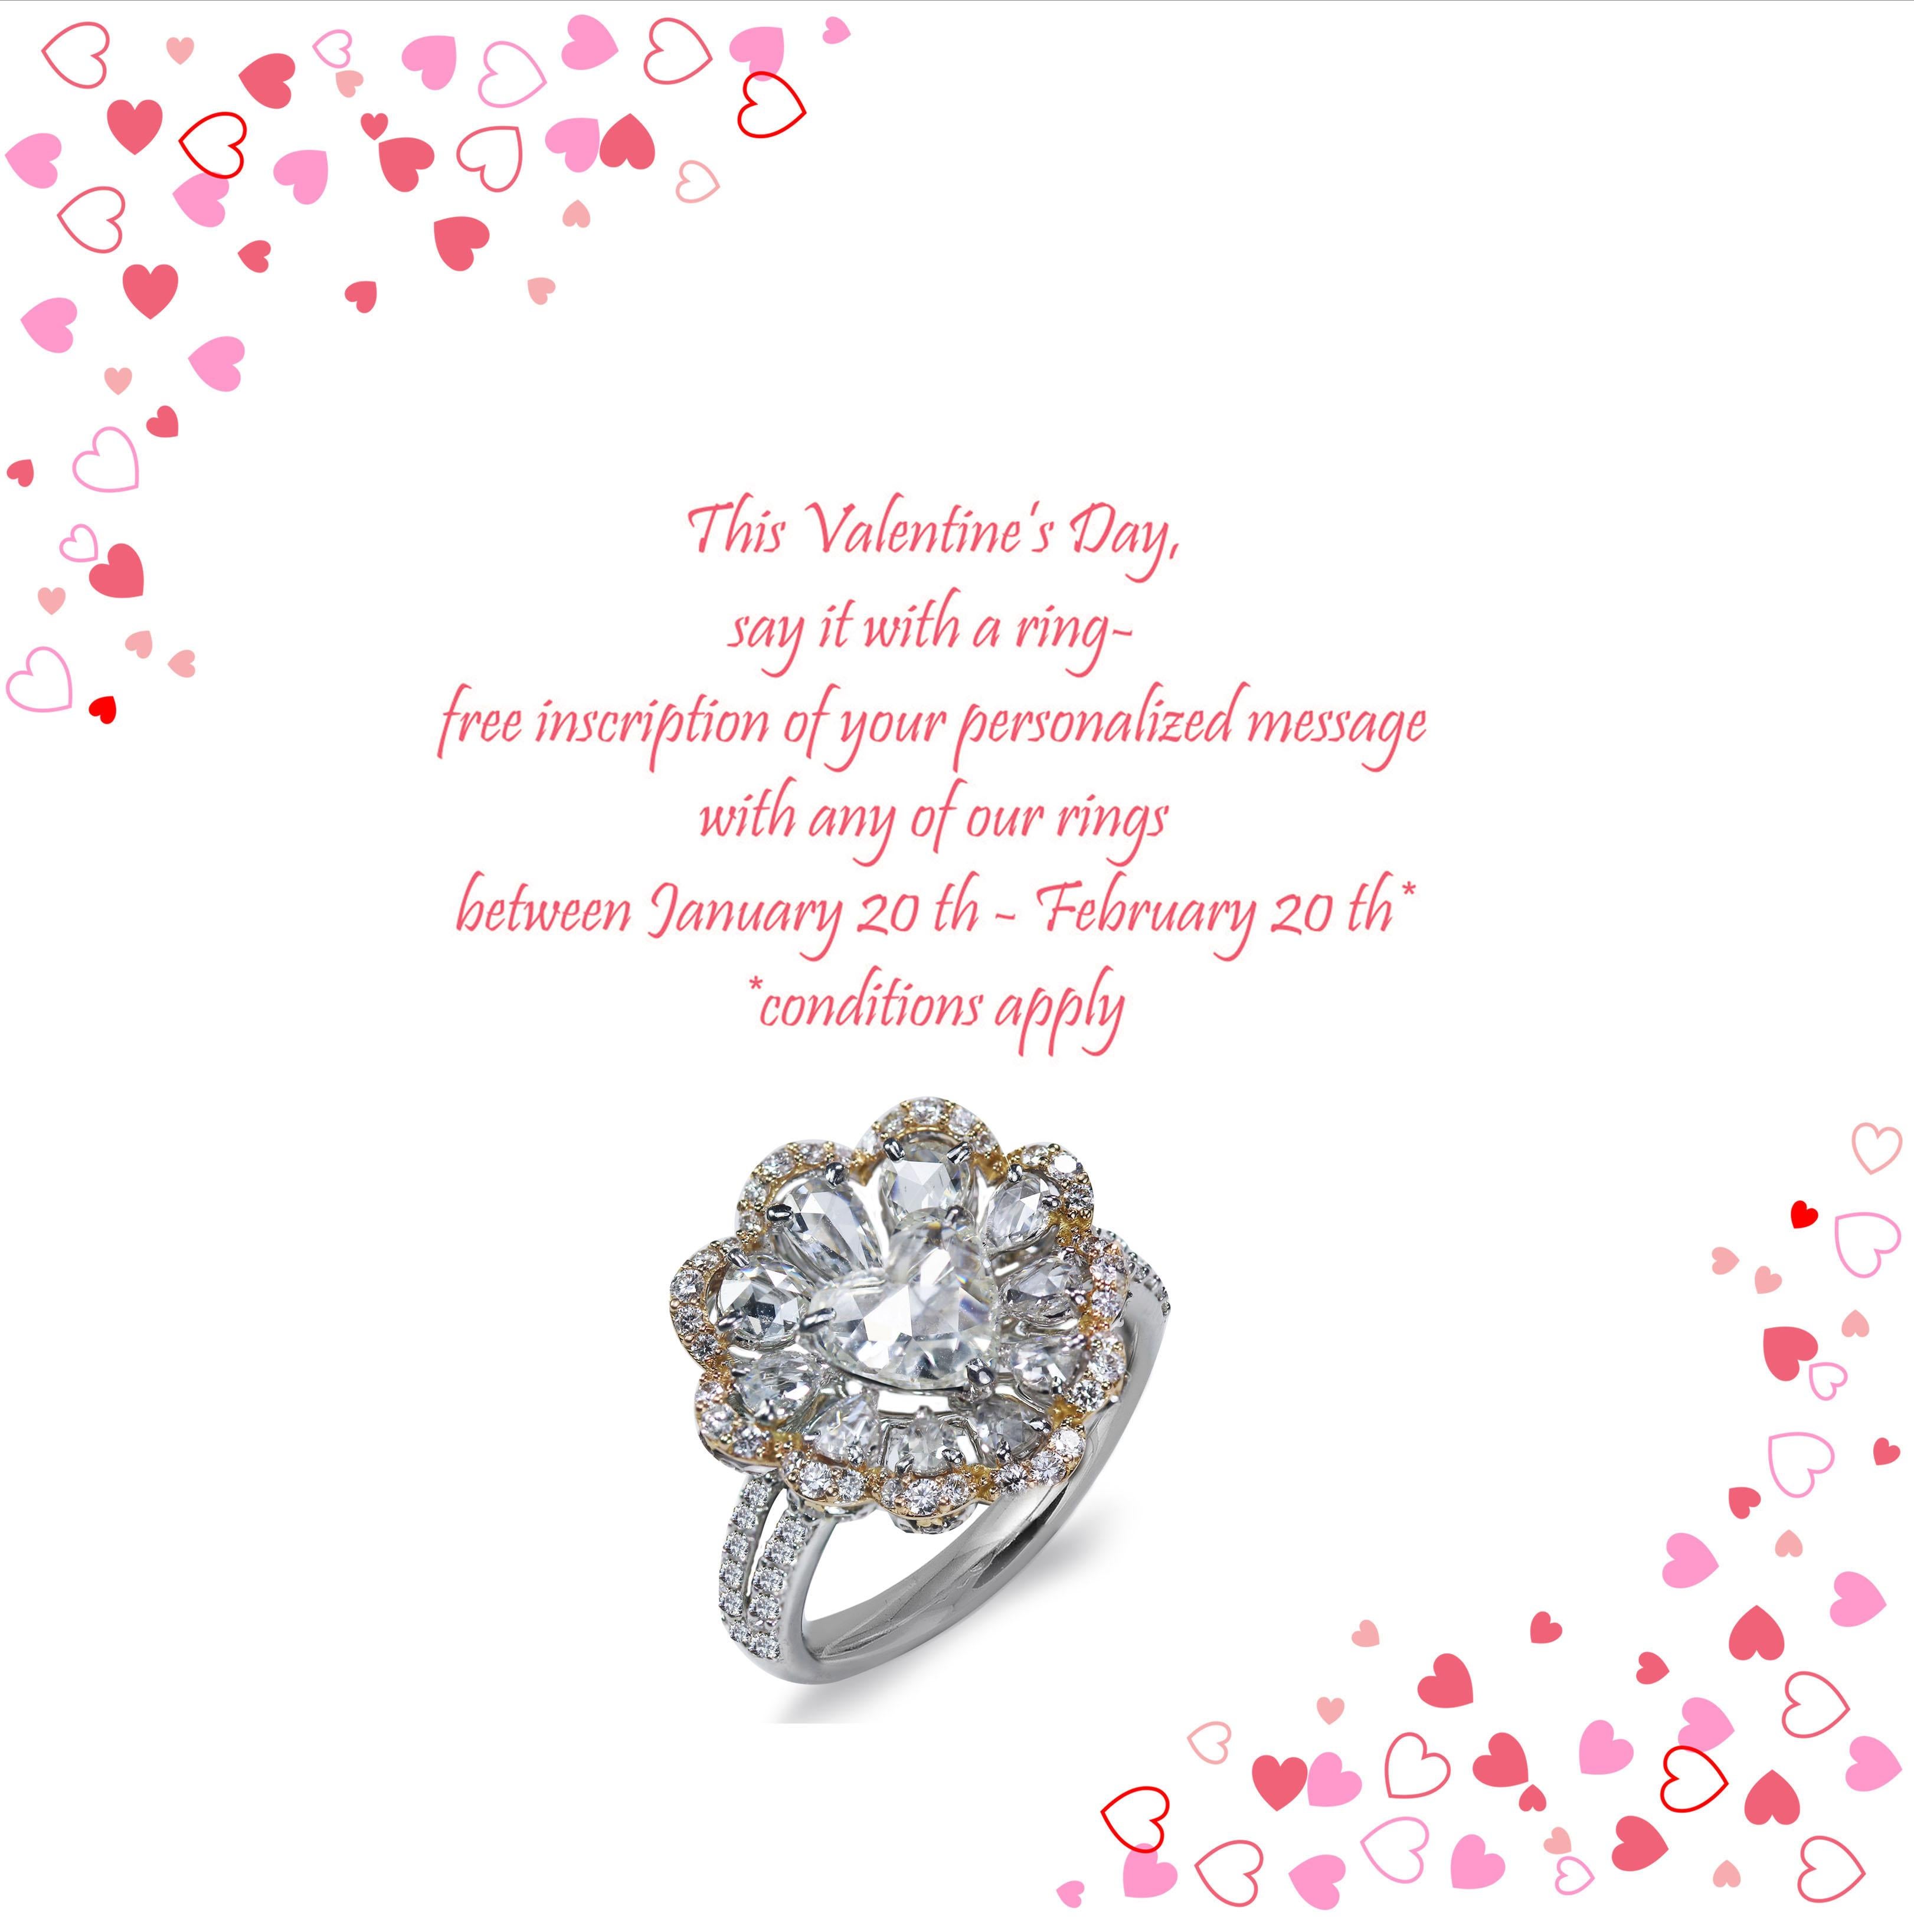 This Valentine’s Day, say it with a ring- free inscription of your personalized message with any of our rings between January 20 th - February 20 th* 

F-G-H/ VS-SI brilliant cut and rosecut floral diamond ring

The timelessness of the design is